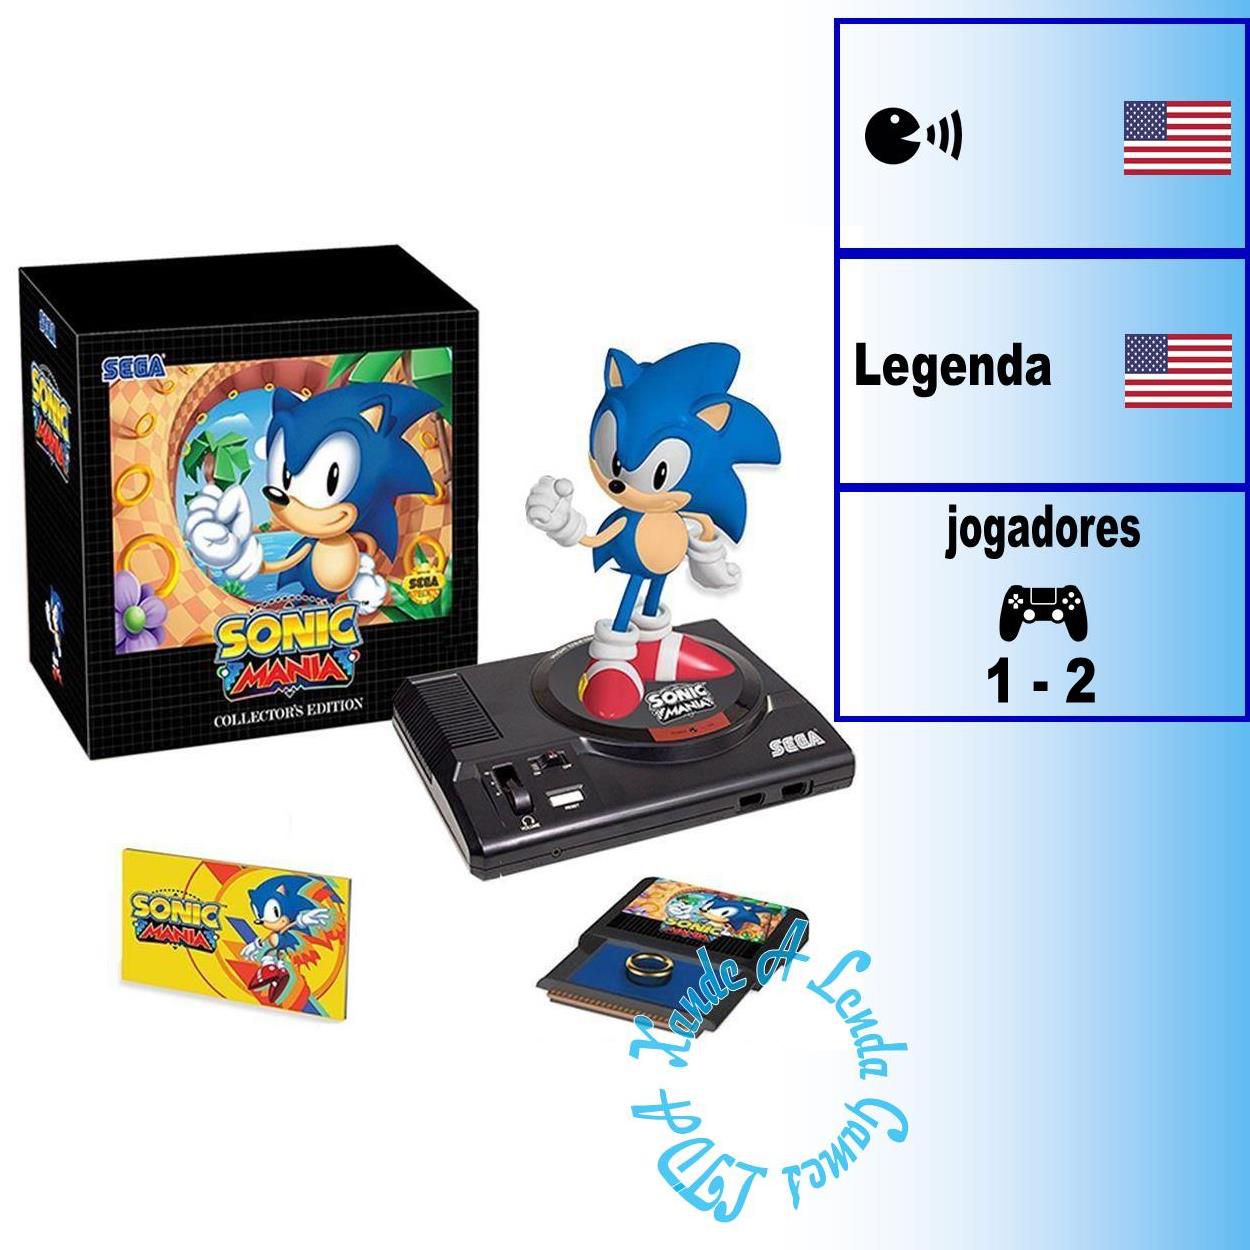 The Switch Version Of The Sonic Mania Collector's Edition Has Been